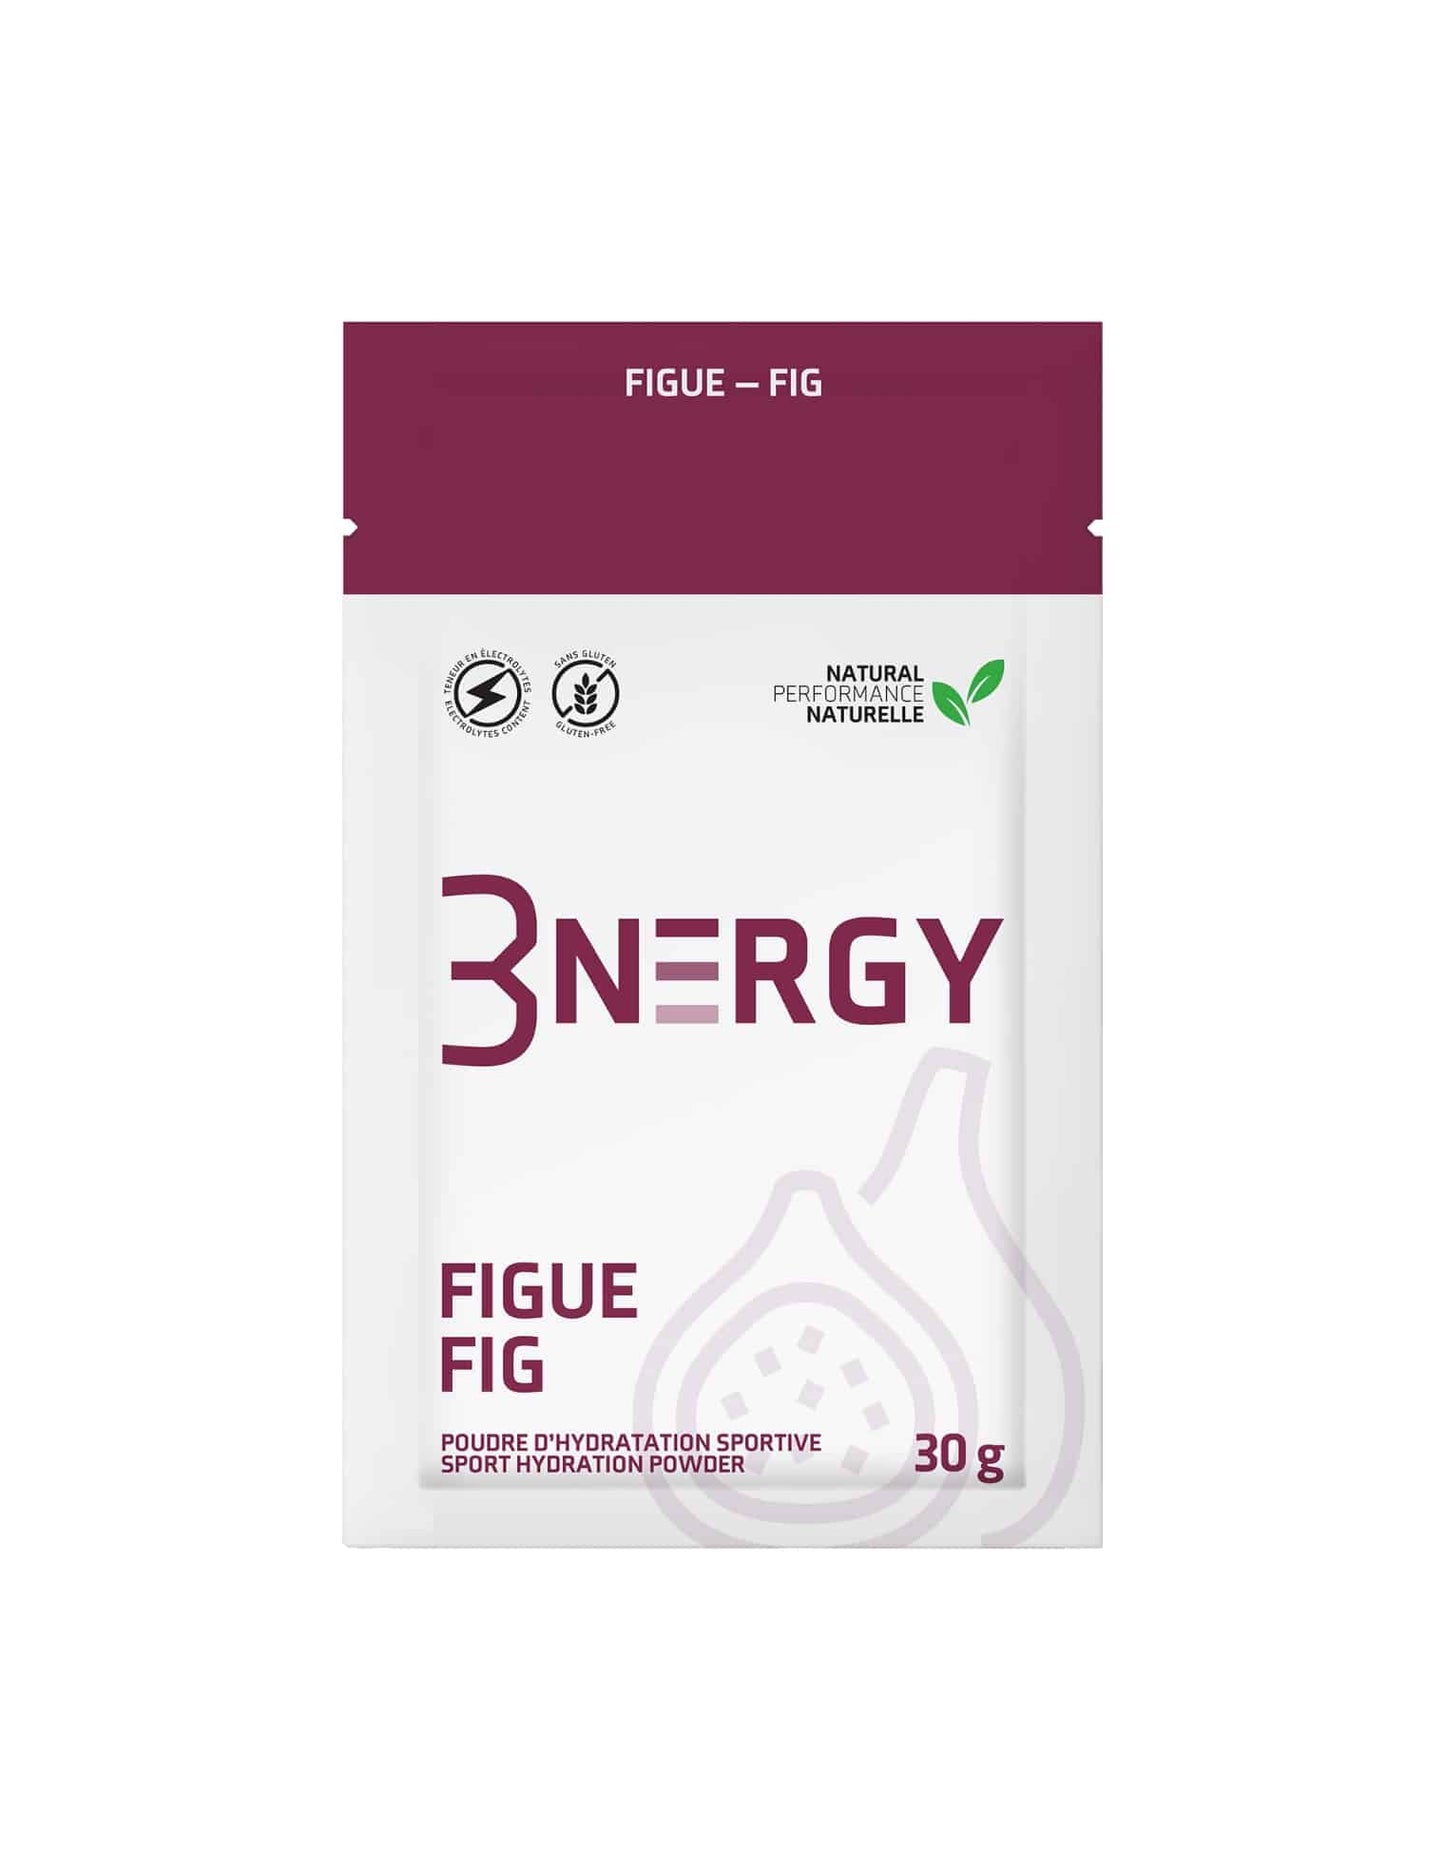 Single sachet of 30g with figs-Maltodextrin-Fructose